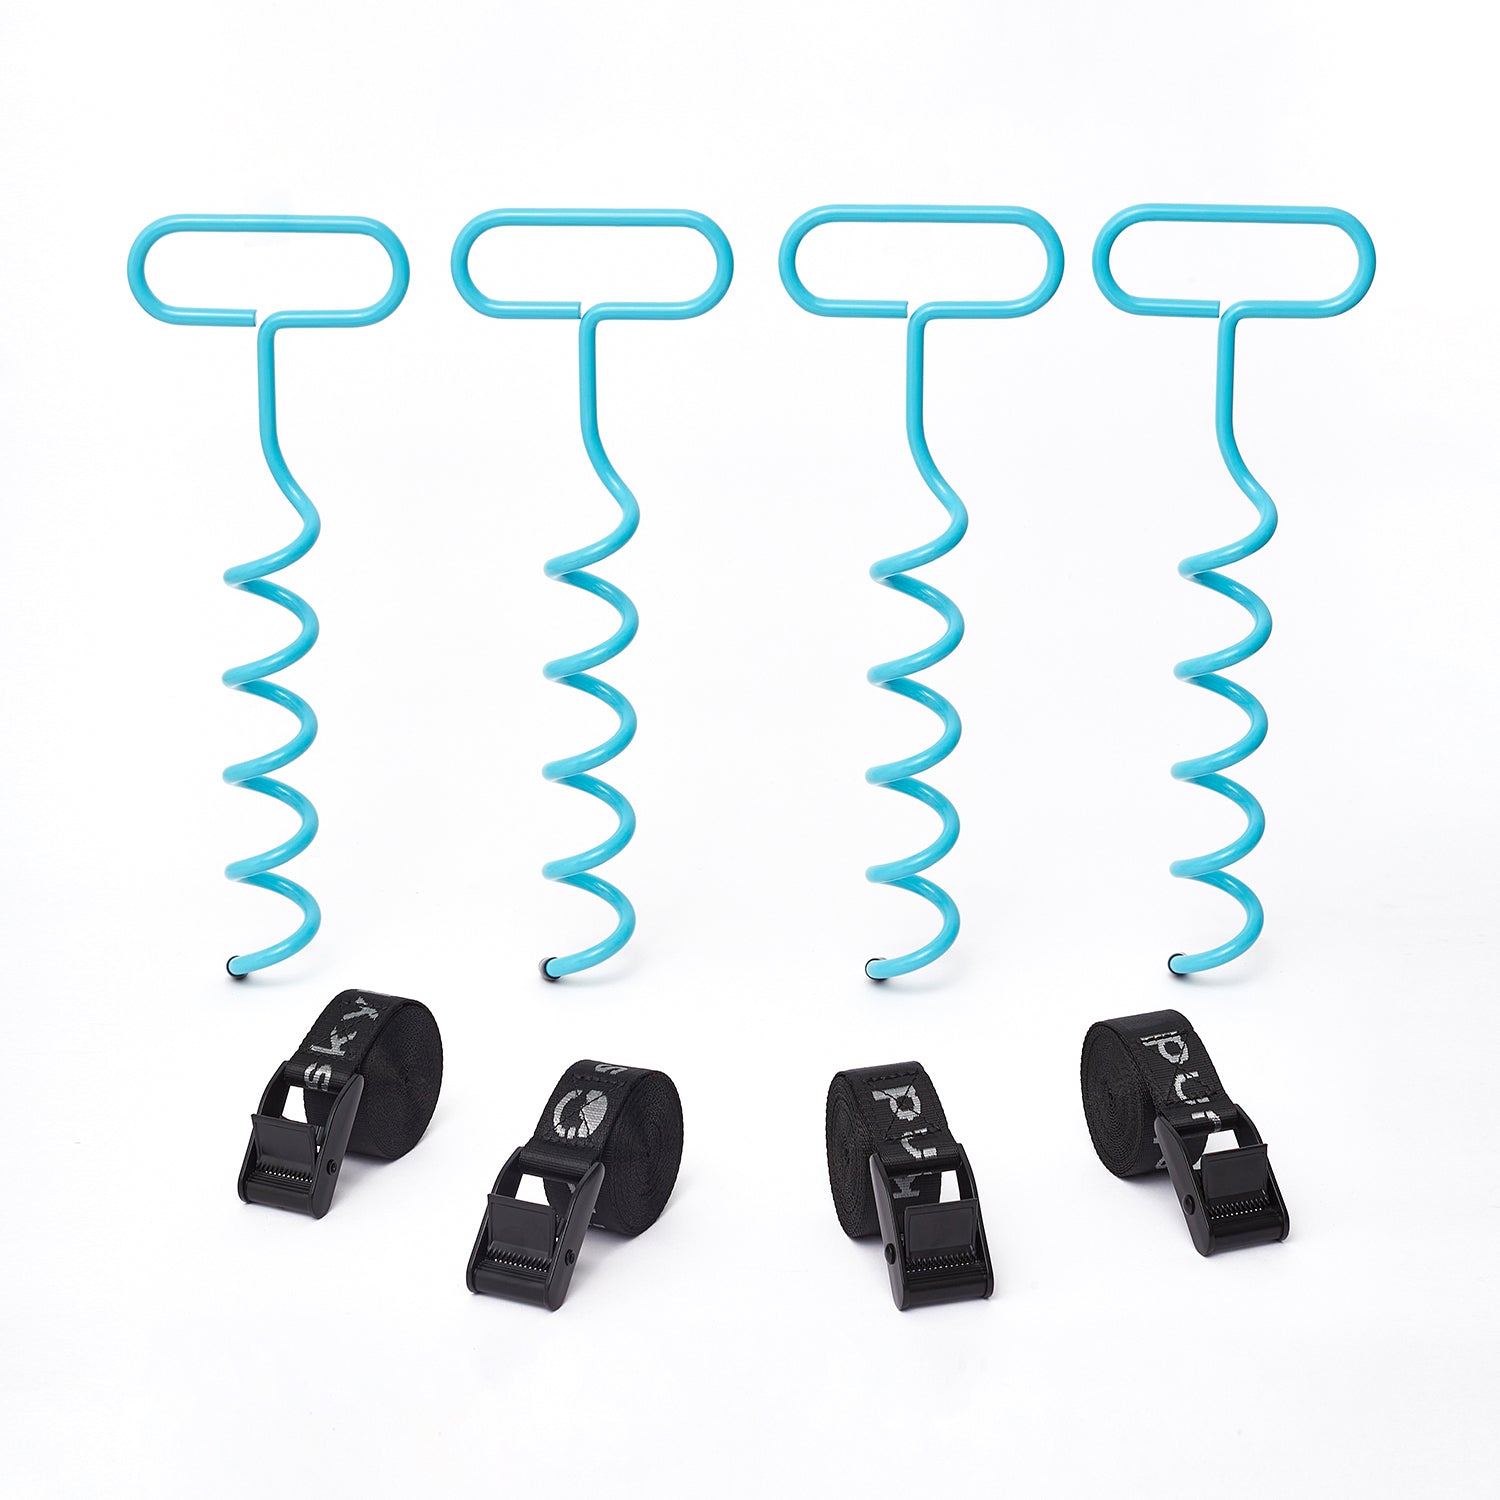 SkyBound Trampoline Anchor Kits - Heavy Duty Trampoline Parts - Unique Oval Shape Design for Easy Hold and Install - Steel Stakes High Wind Anchor Kit with Strong Nylon Belt - Set of 4 - Blue.